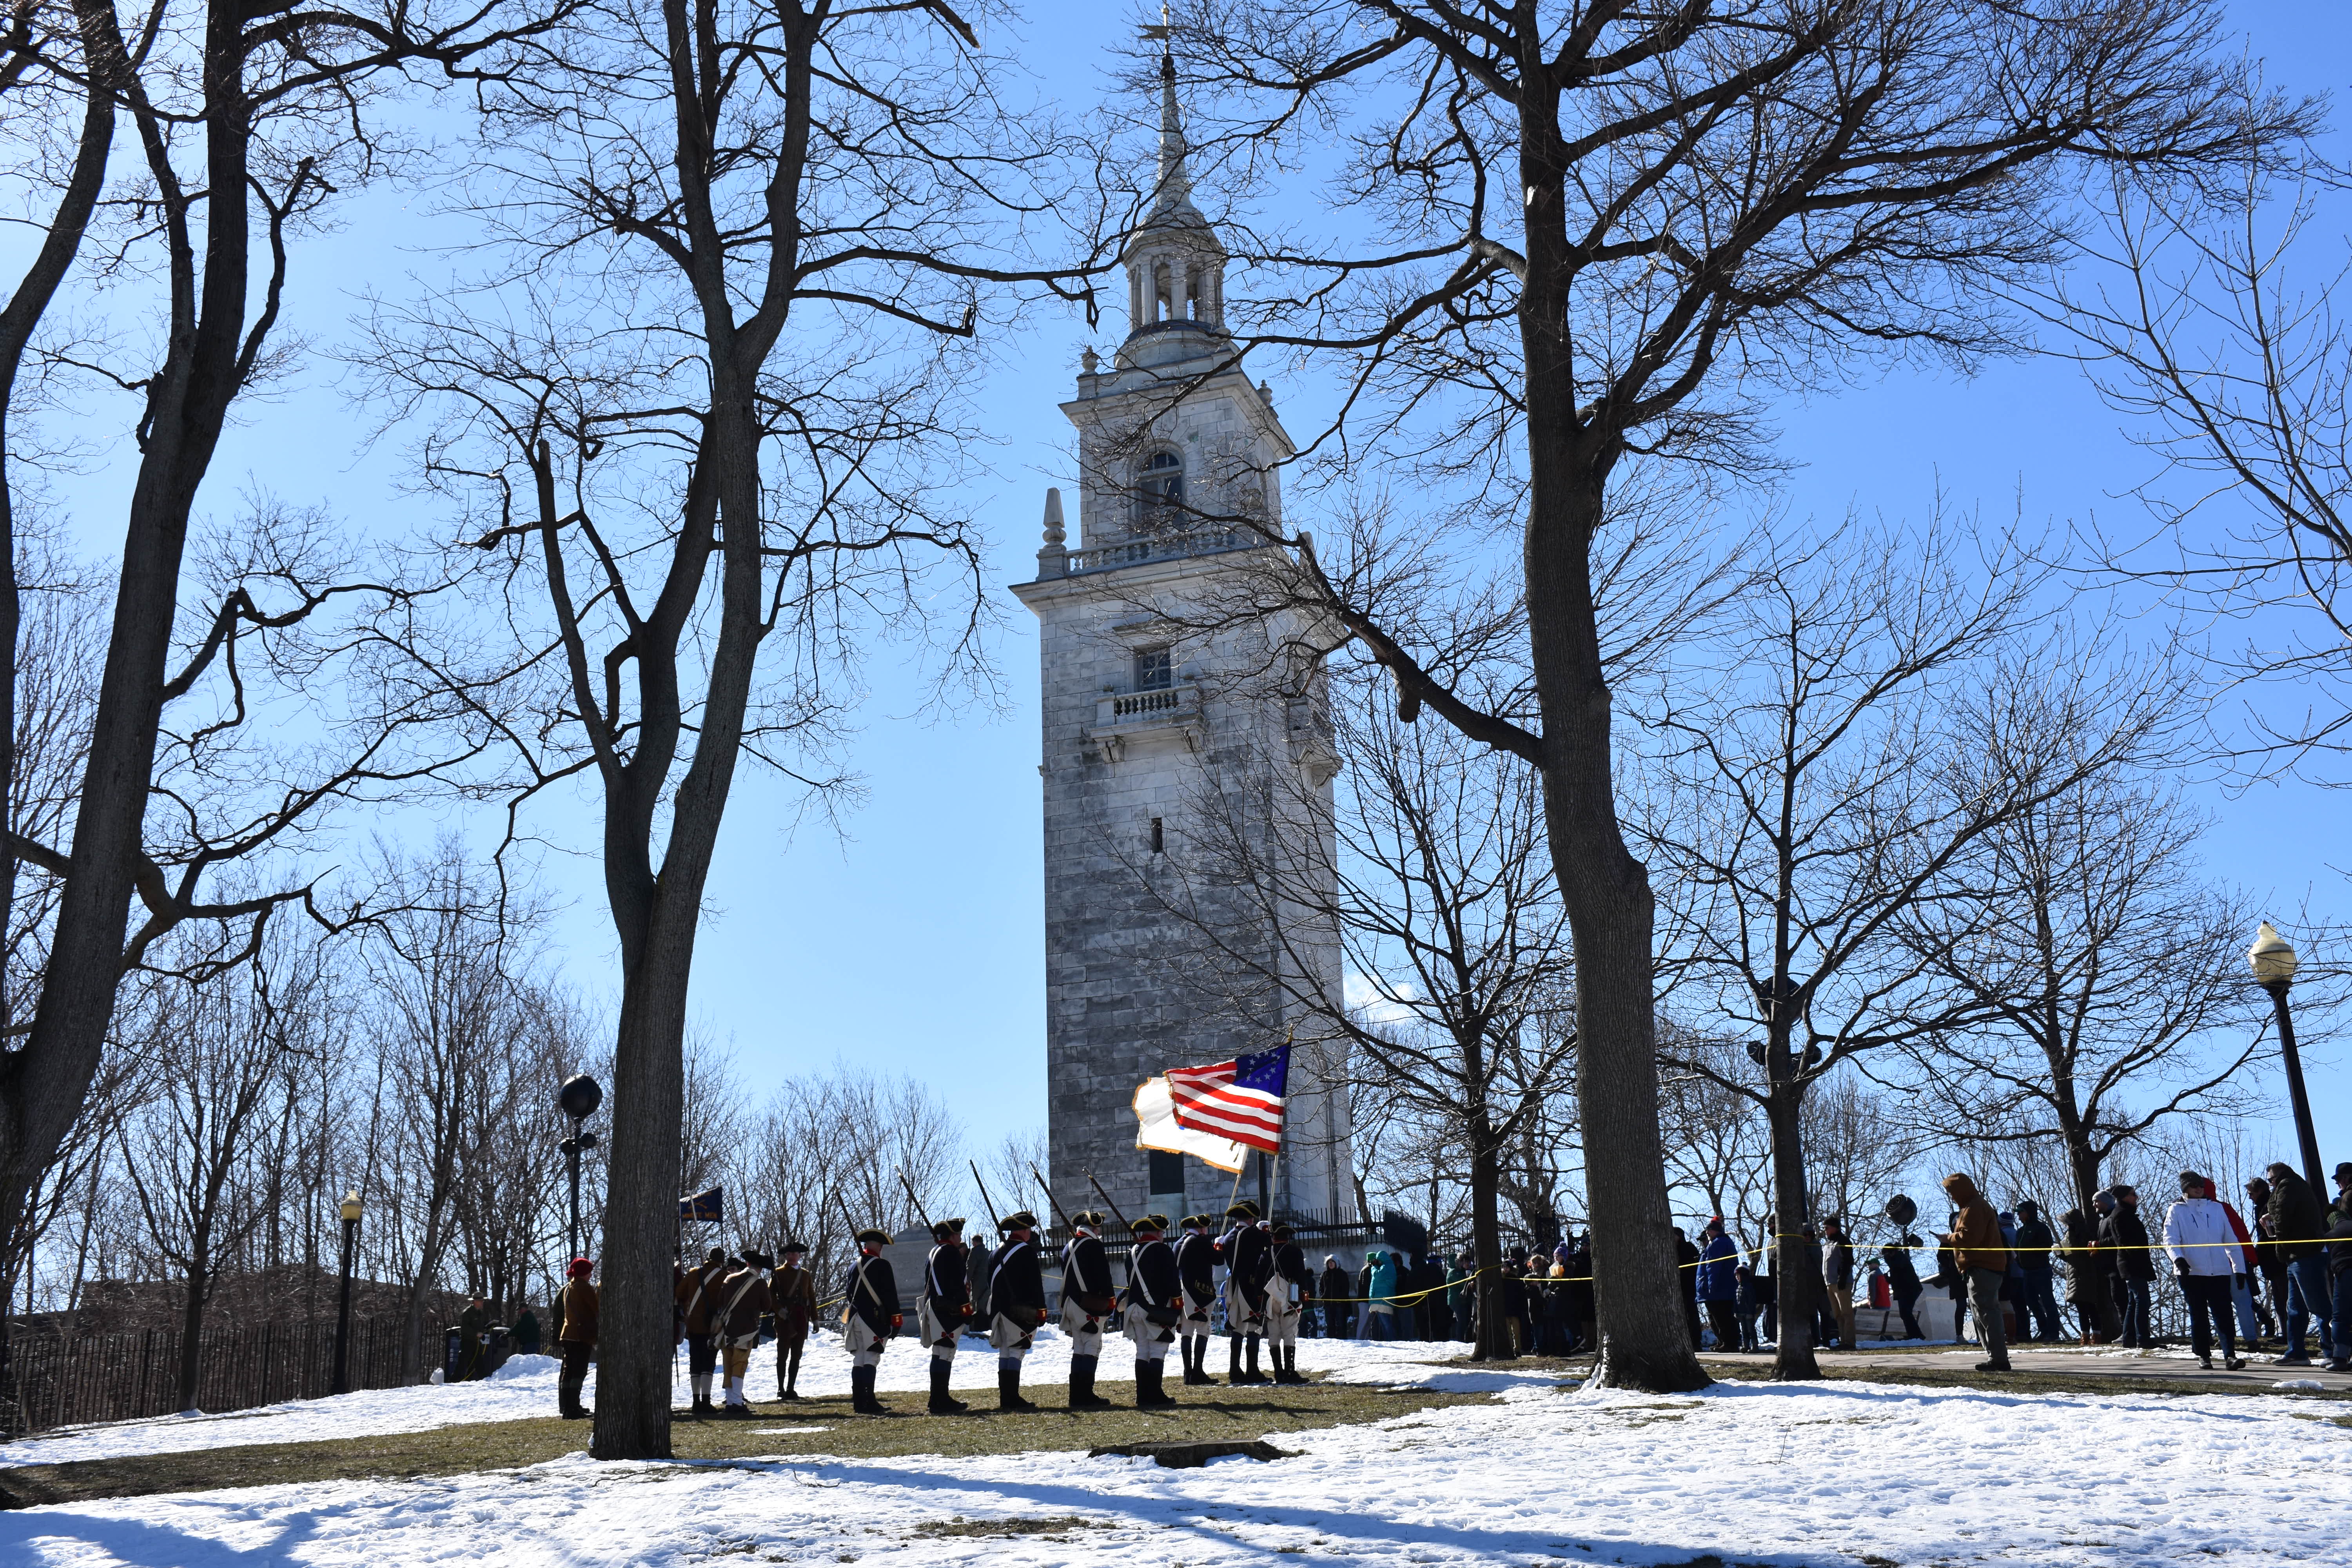 wintry view of Dorchester Heights monument through the bare tress. ROTC members posting flags in the foreground